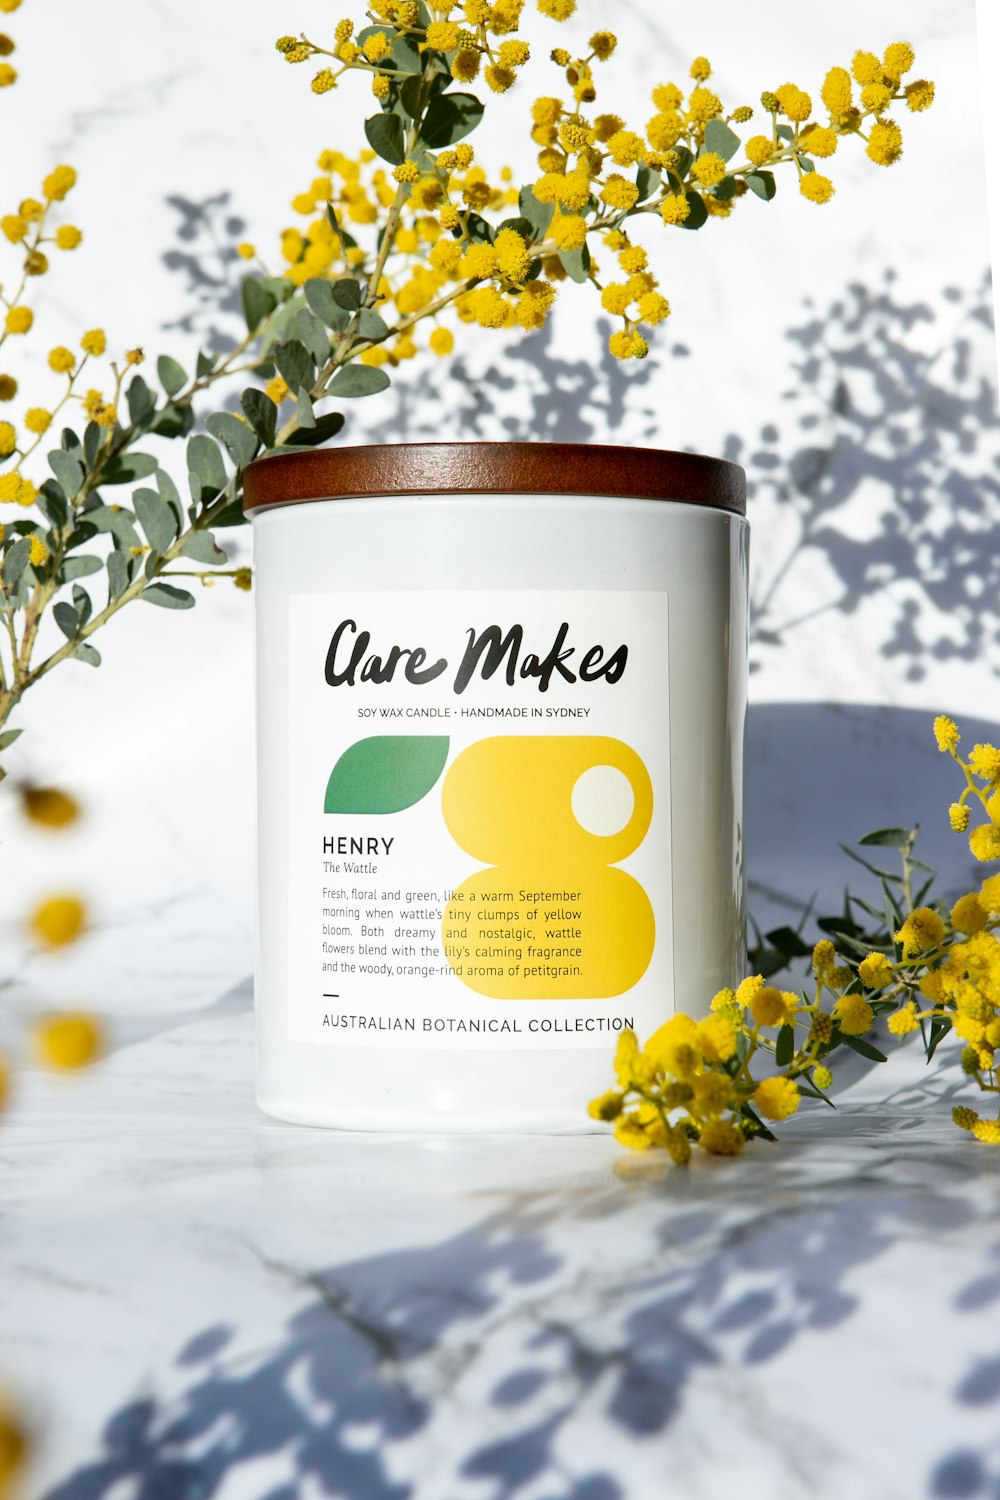 a can of care maker next to some yellow flowers